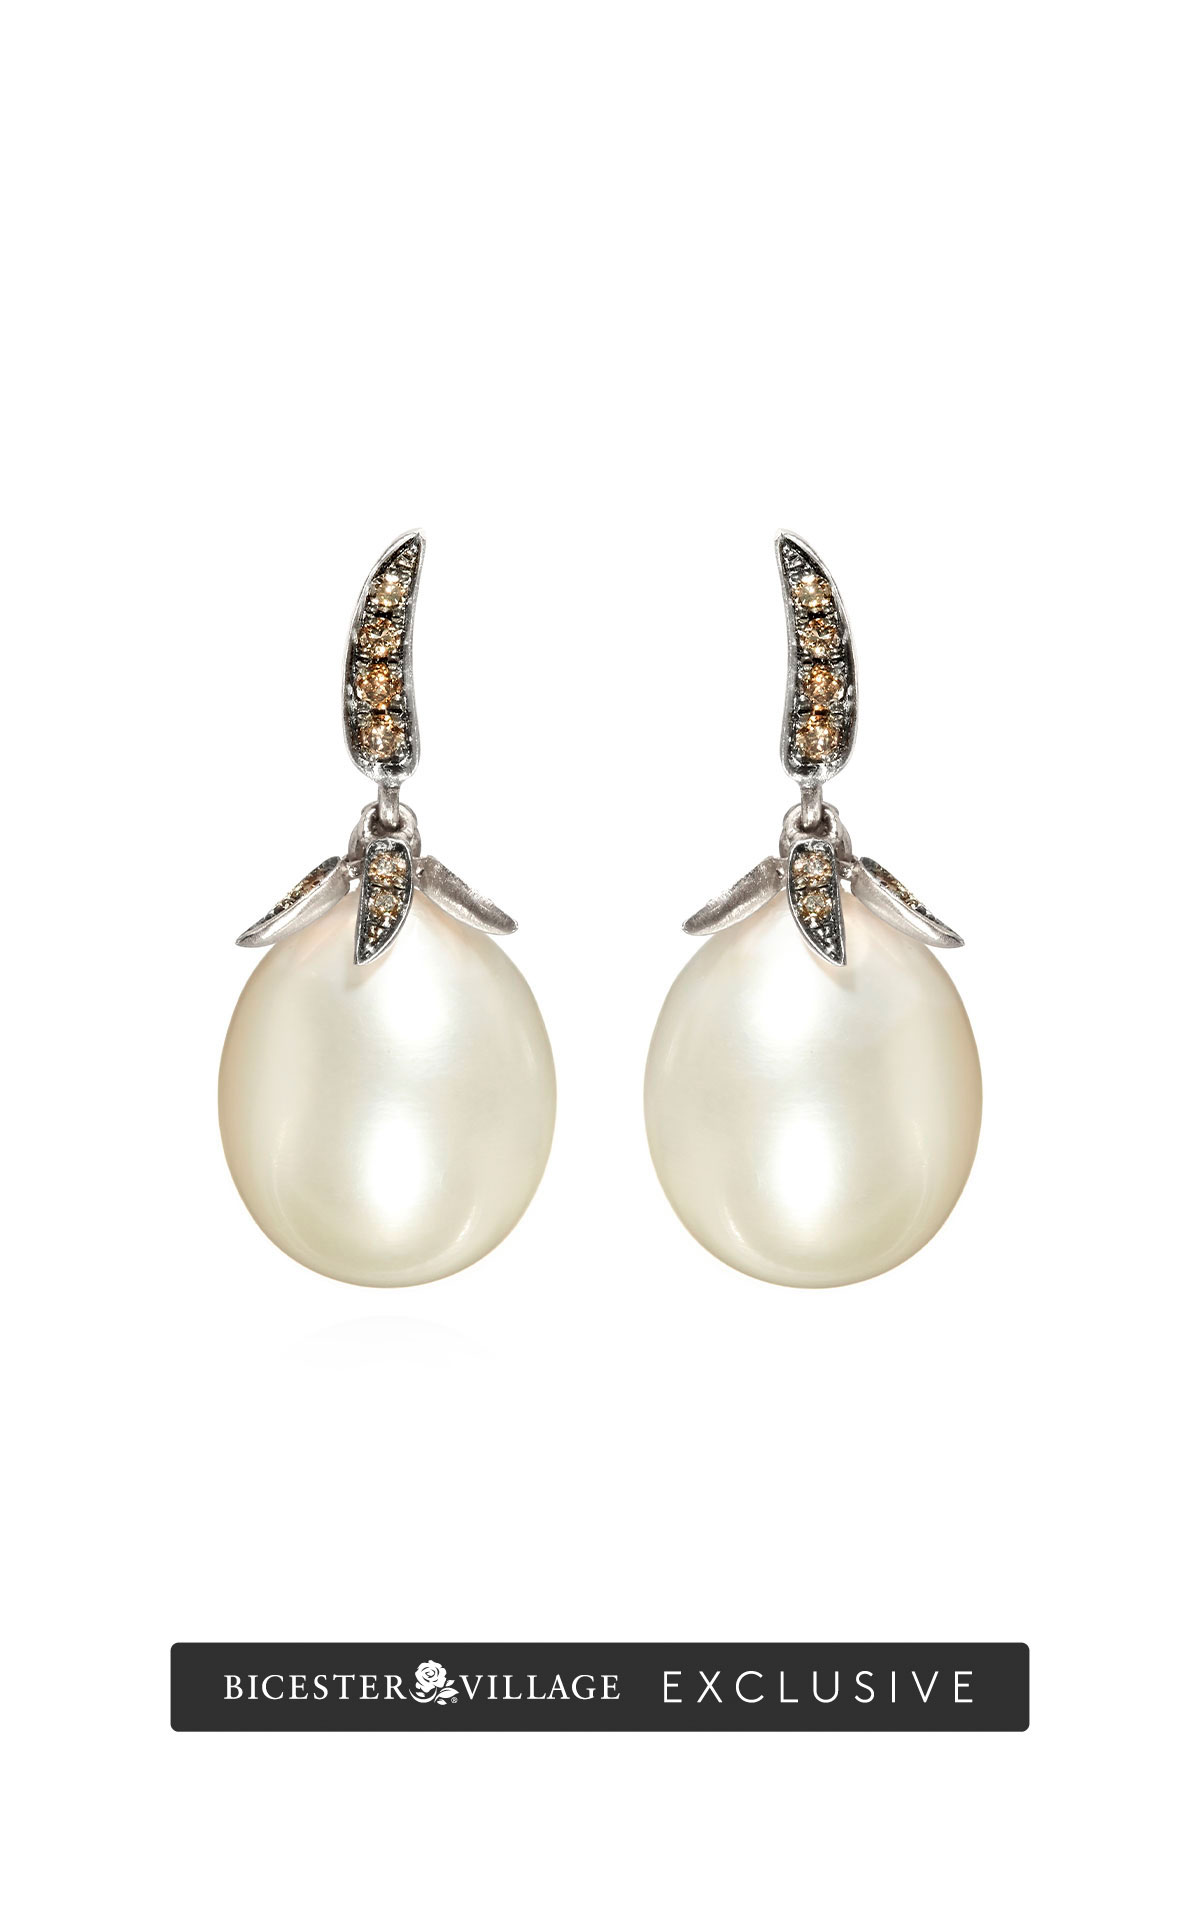 Annoushka Diamond and pearl earrings from Bicester Village